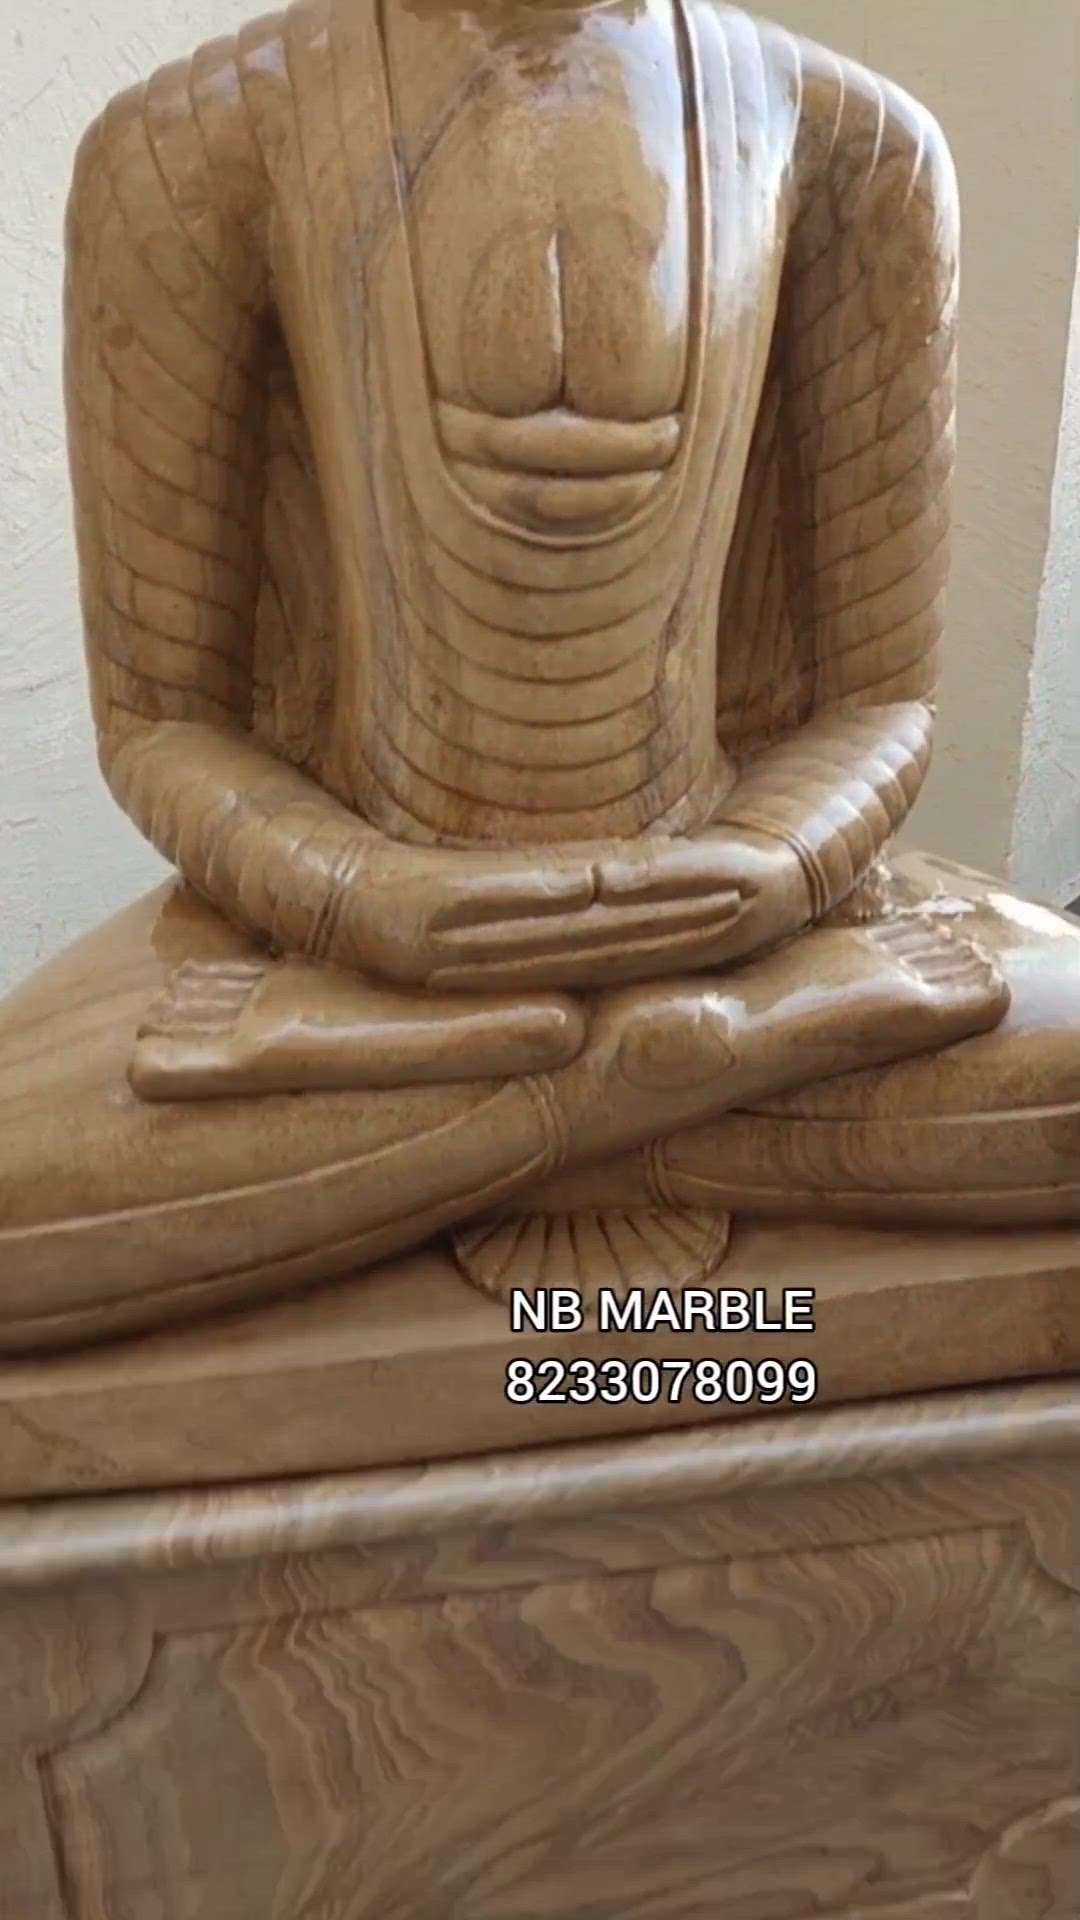 Sandstone Buddha Sculpture

Decor your garden and living area , open terrace with beautiful Buddha Sculpture

We are manufacturer of marble and sandstone Buddha

We make any design according to your requirement and size

Follow me @nbmarble 

More information contact me
082330 78099 

#buddha #buddhadesign #nbmarble #stone #sandstone #gardendecor #sculpture #buddhasculpture